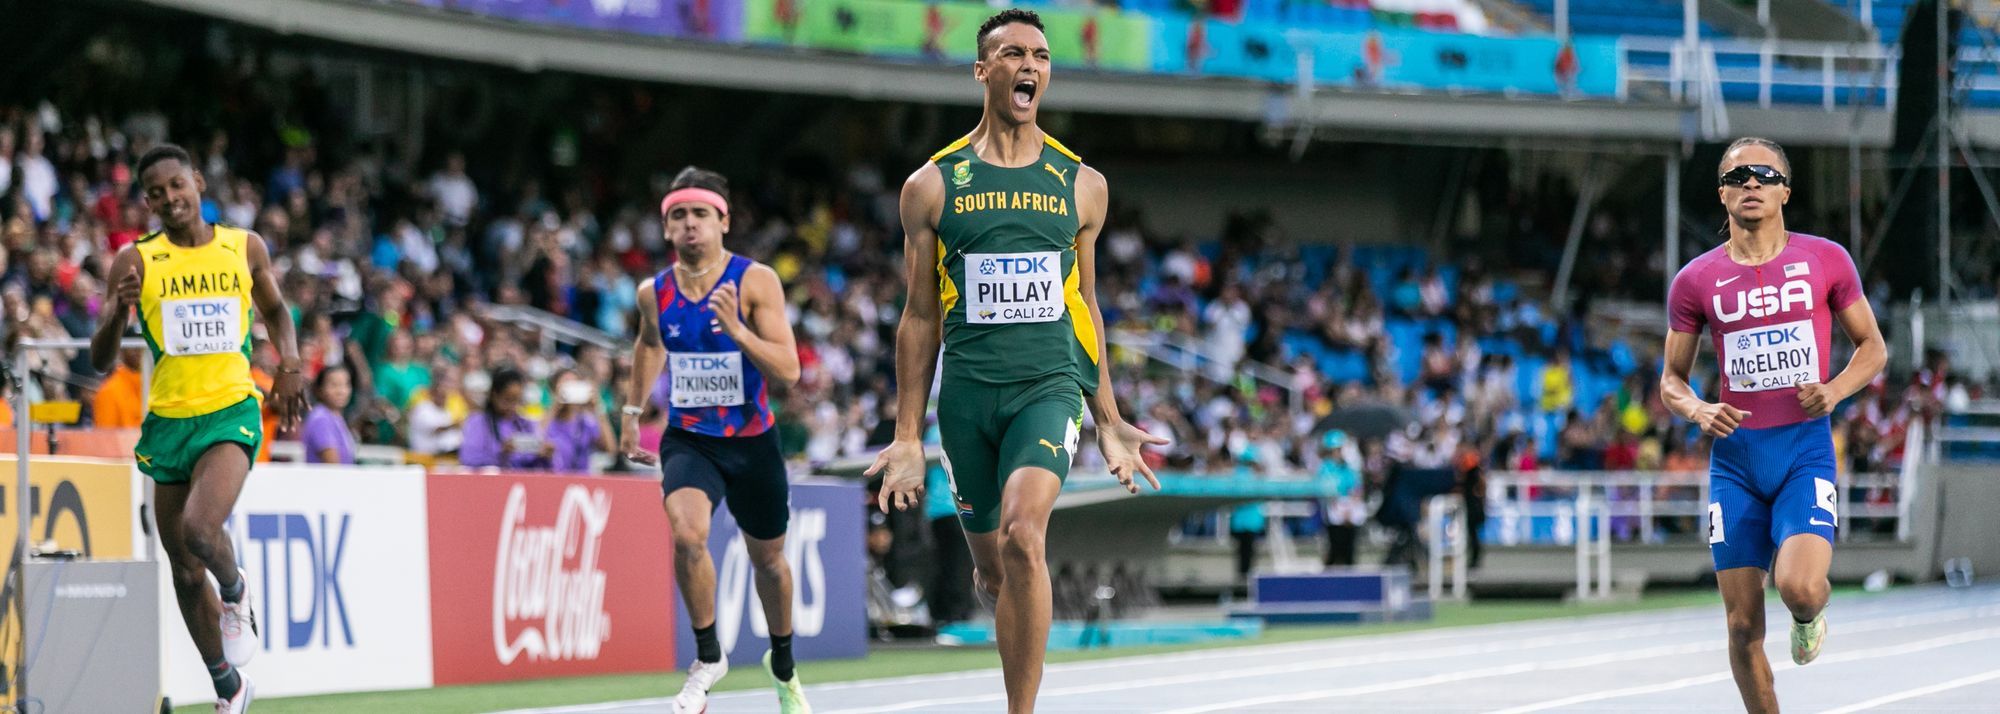 The moment many will remember is Lythe Pillay's win at the World U20 Championships. But the moment few will know about is the backdrop to that performance